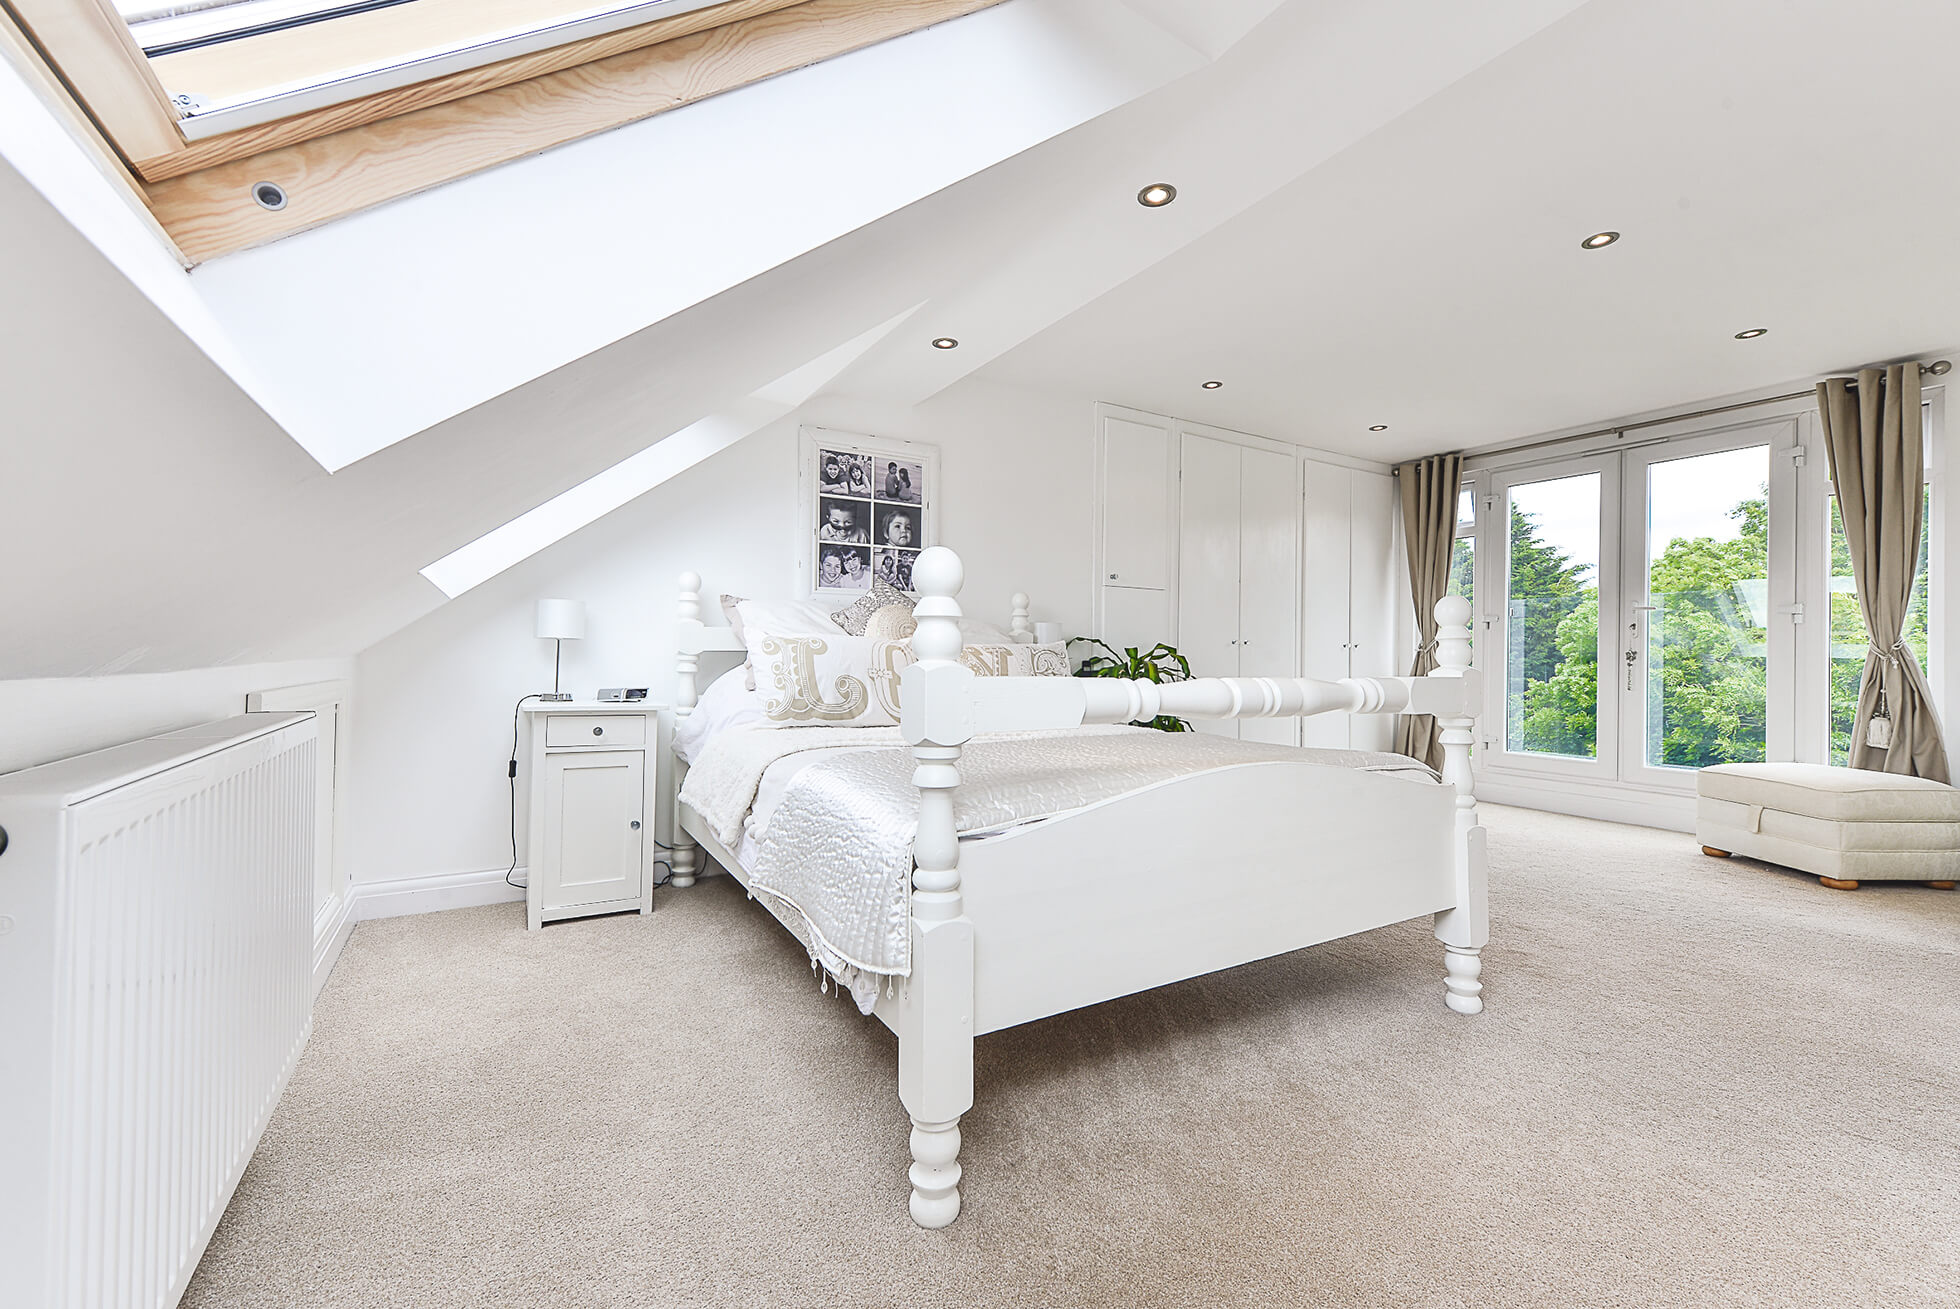 Do you have a question about converting your Loft in Ickleford? Here are the most popular questions asked by our clients.